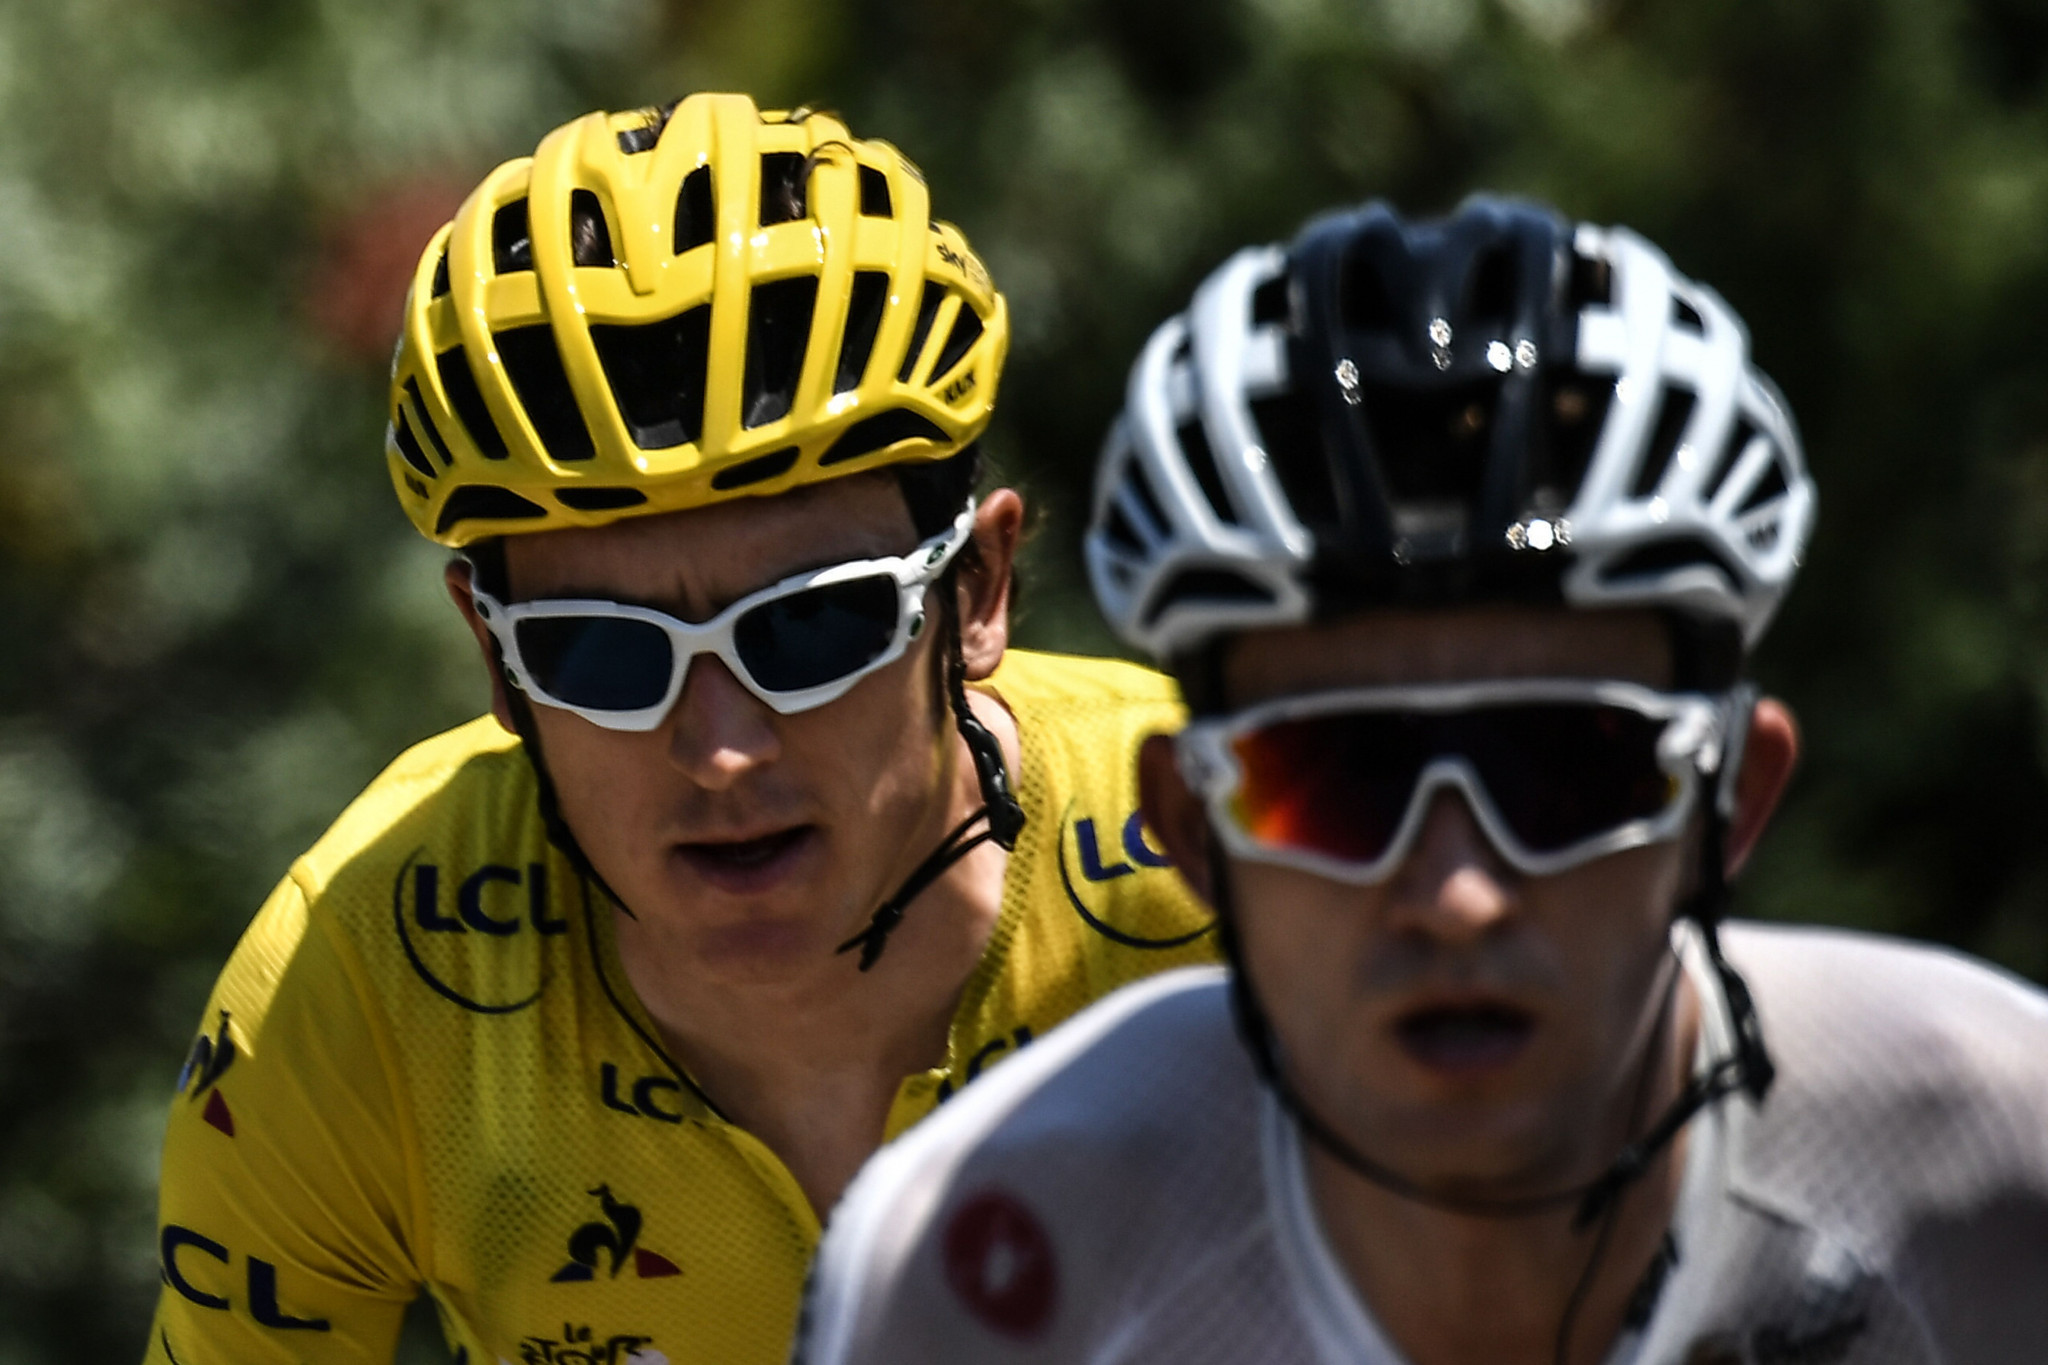 Michał Kwiatkowski, right, pictured supporting Geraint Thomas at the Tour de France will be one of the favourites at the Tour de Pologne ©Getty Images